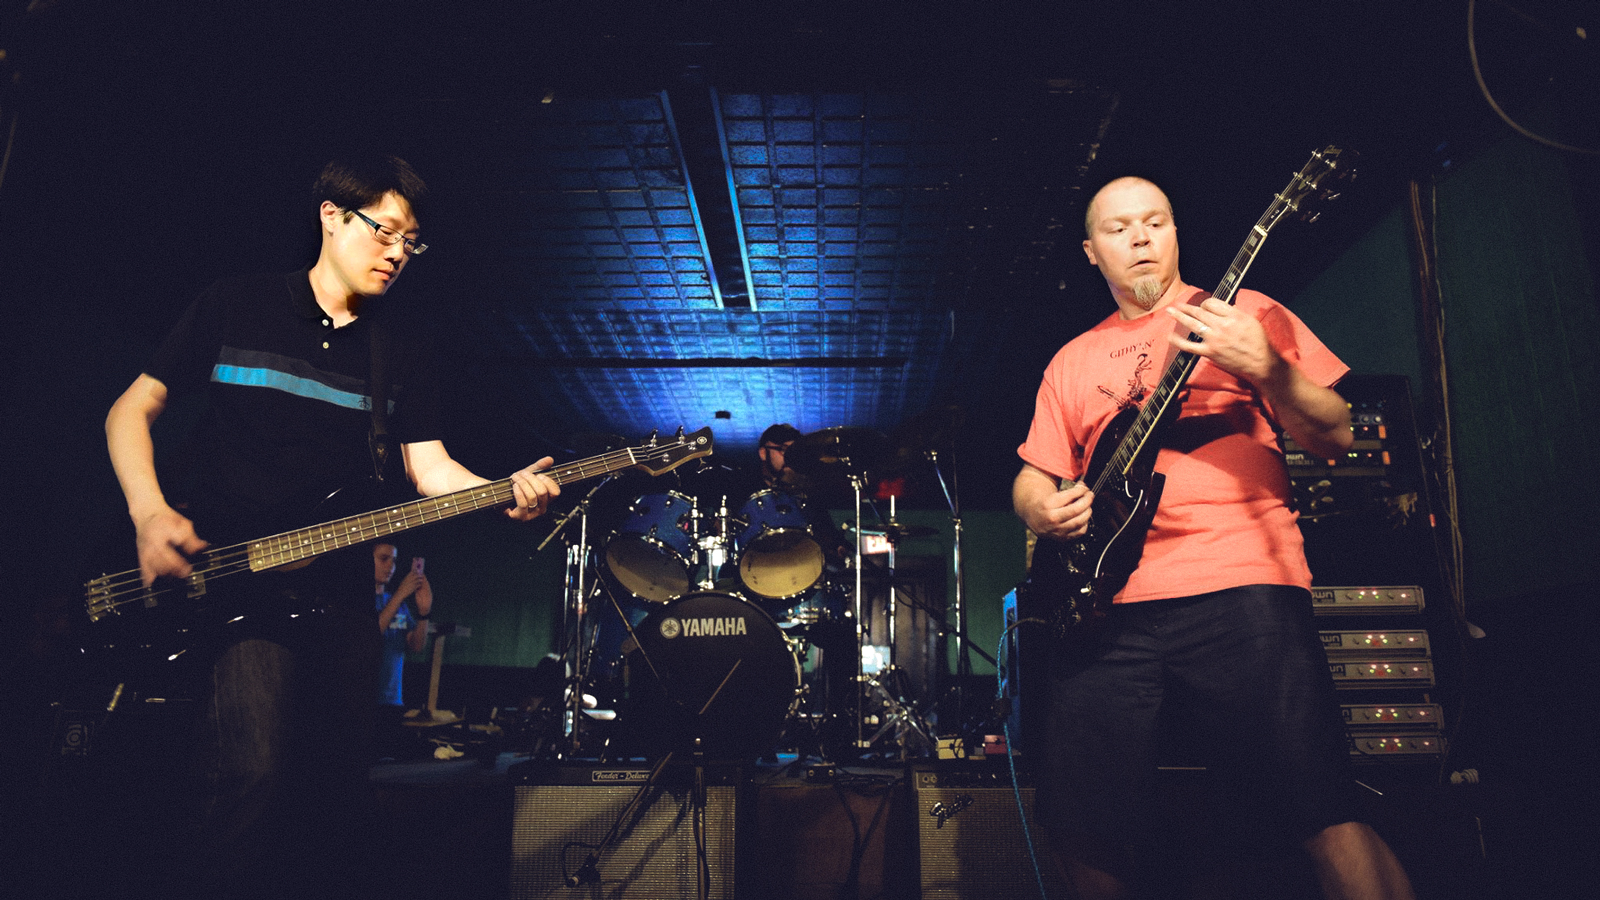 Two men performing in a punk rock group.